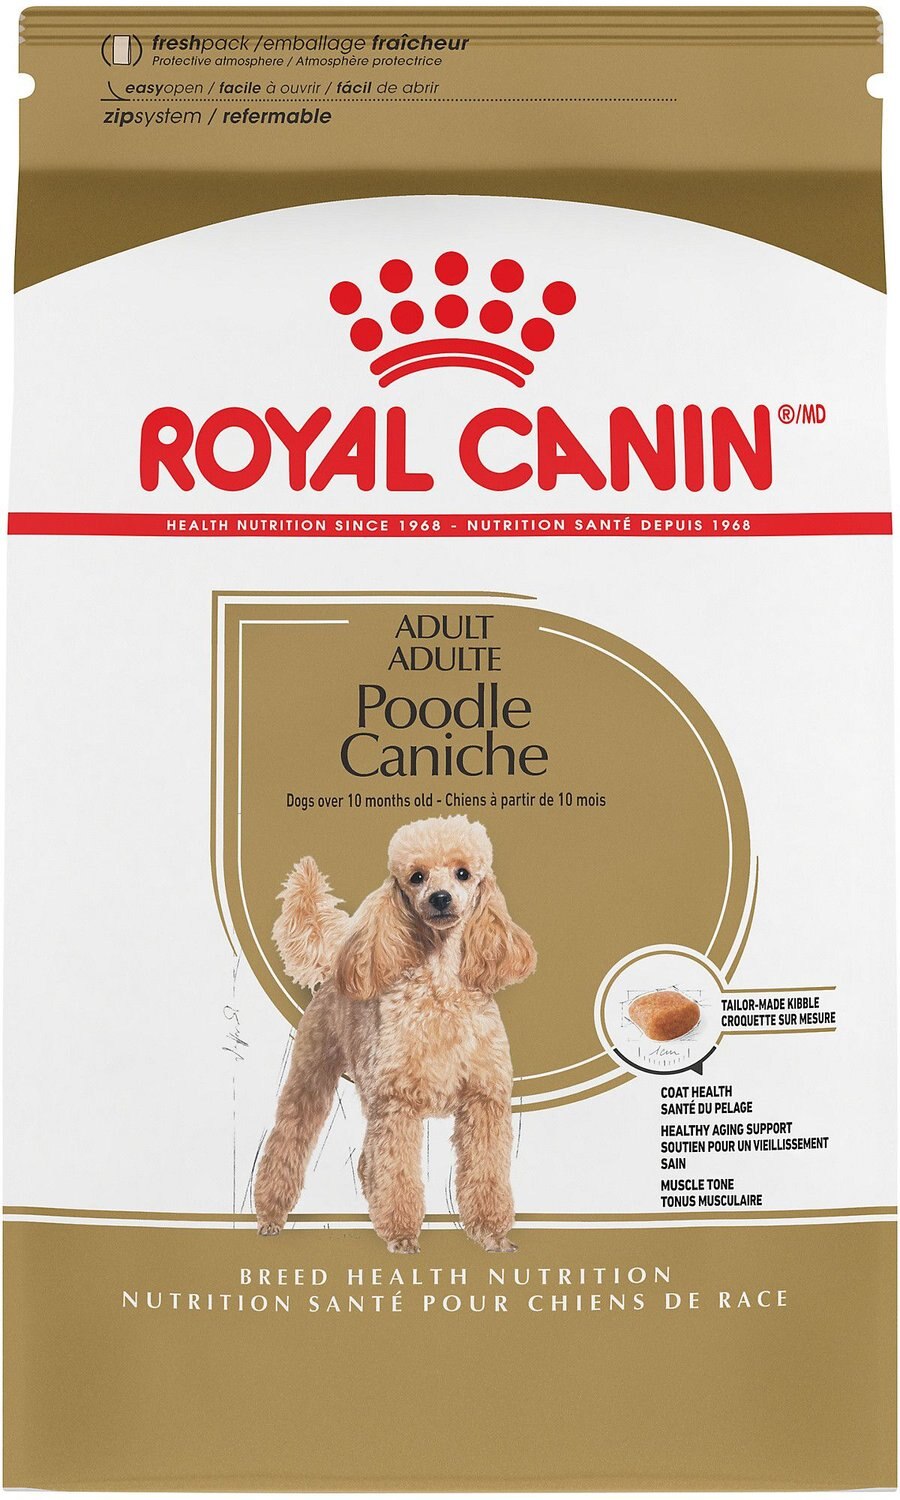 royal canin toy poodle